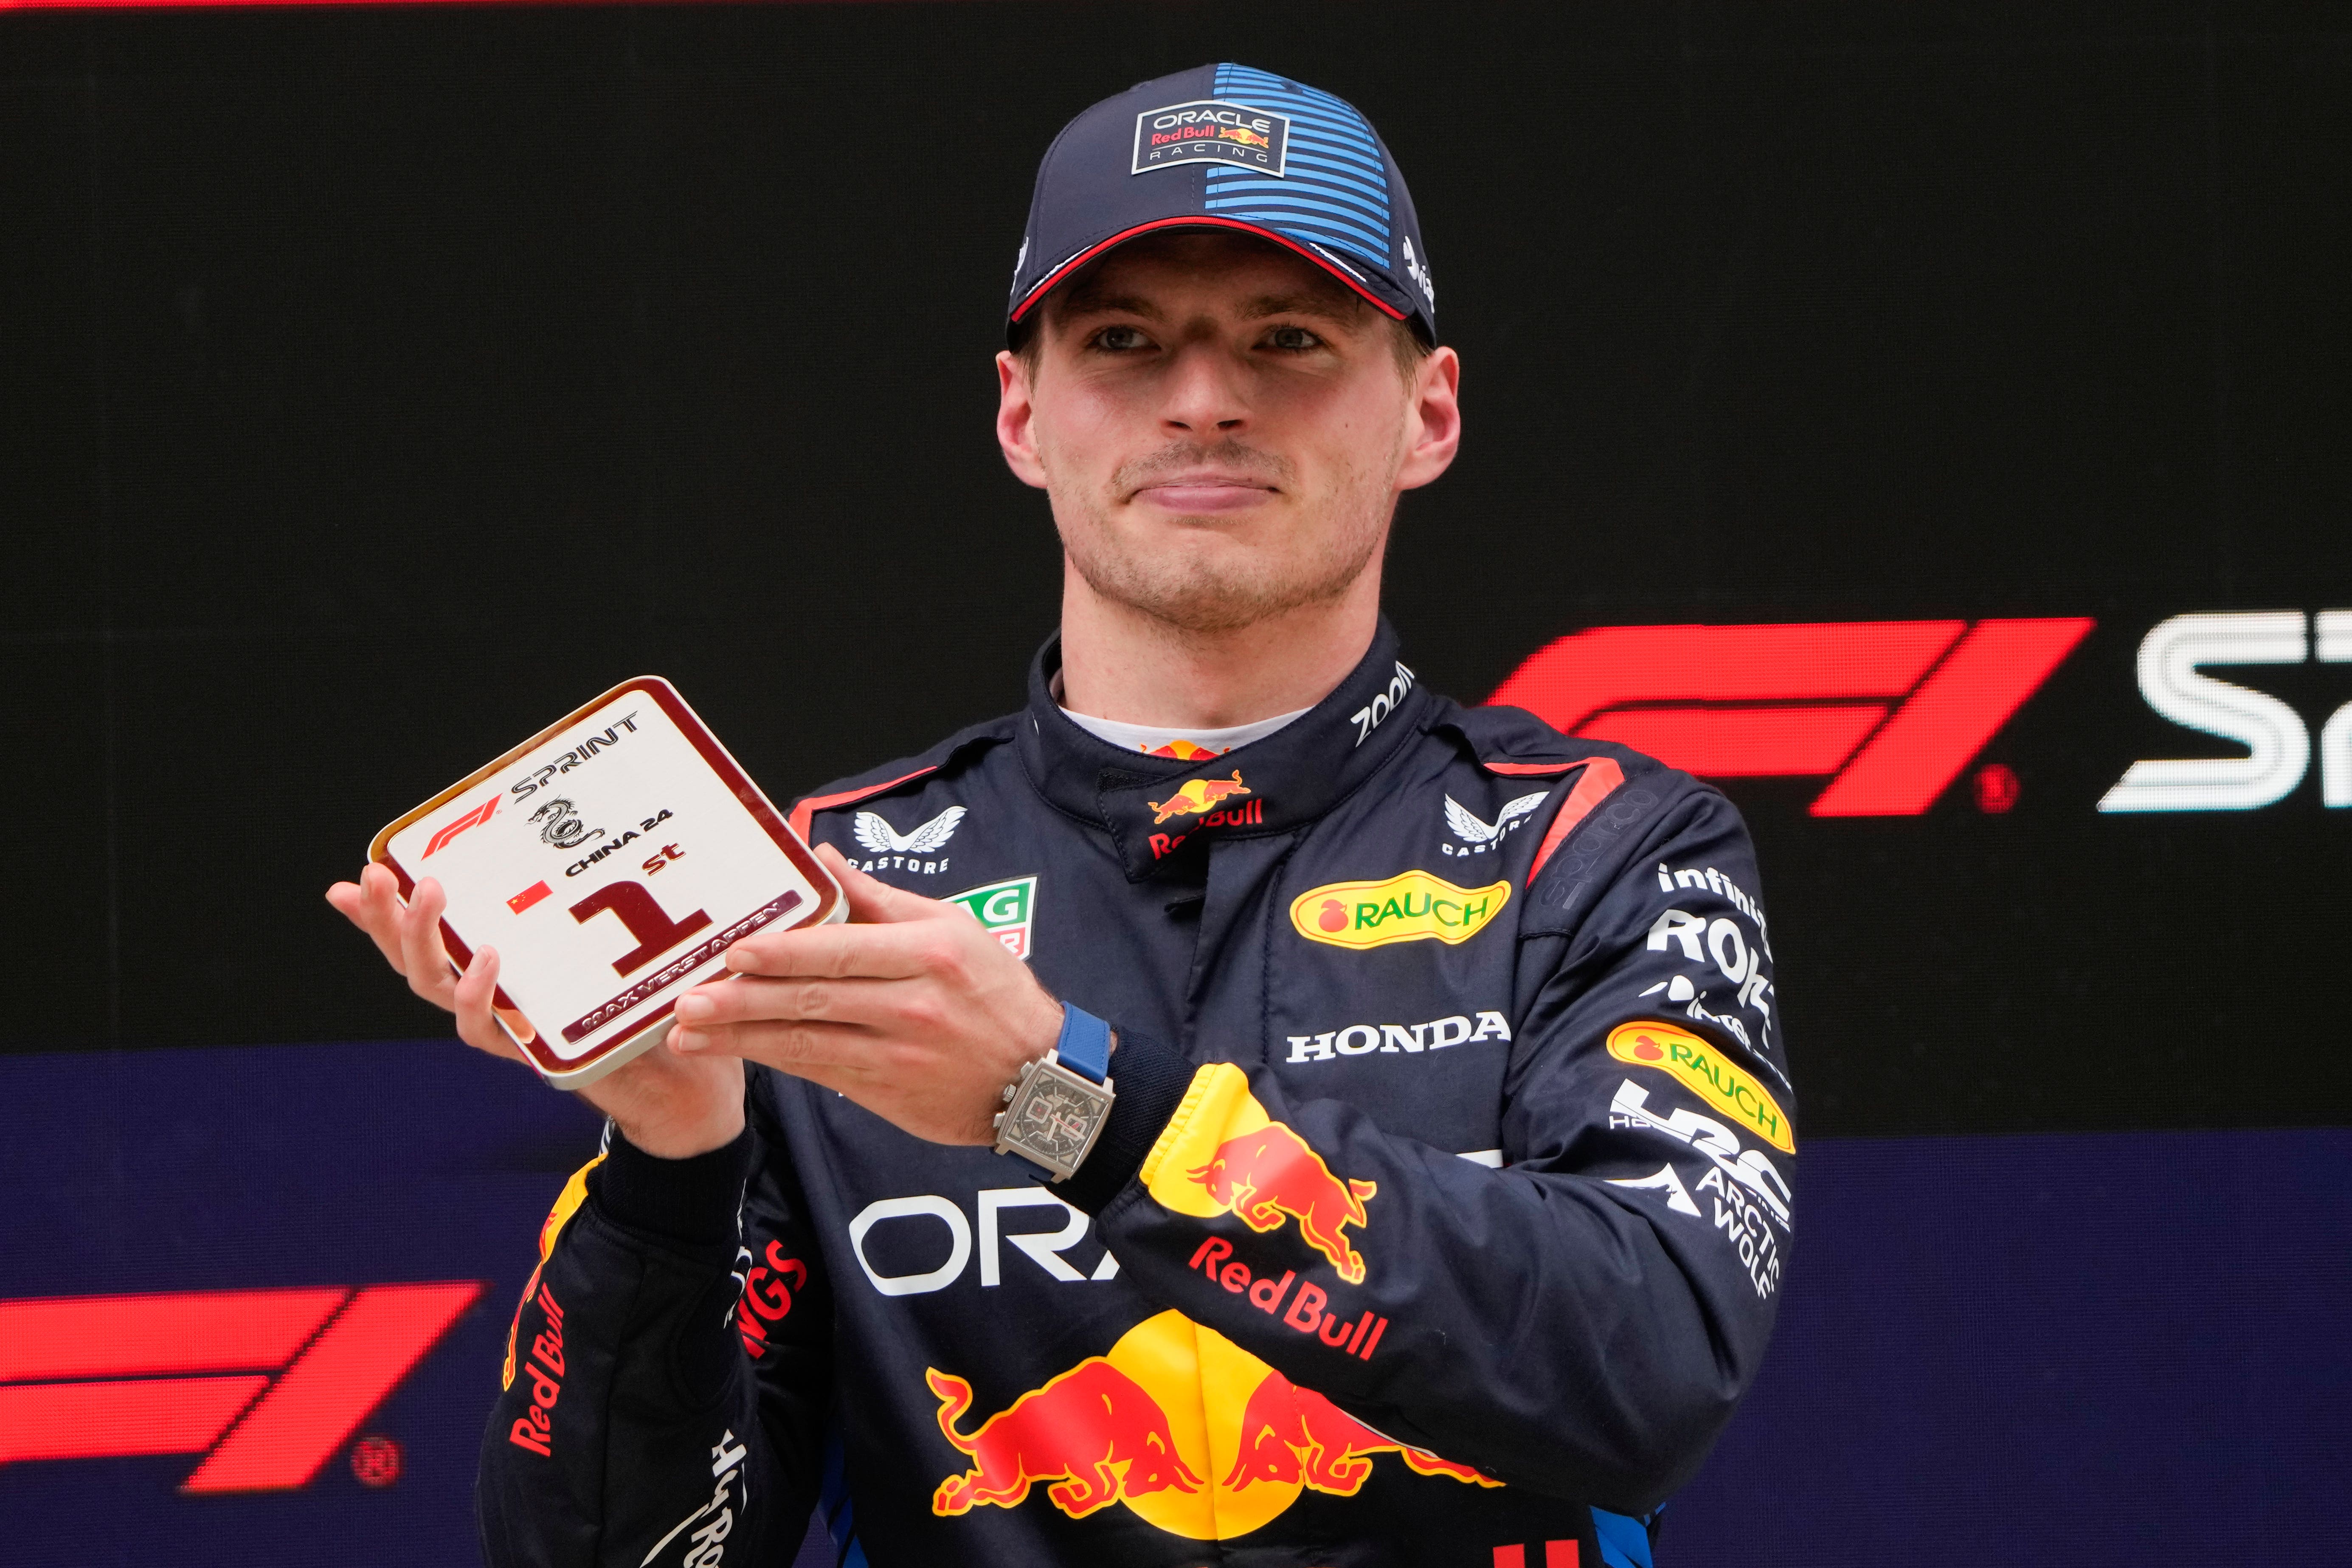 Red Bull driver Max Verstappen of the Netherlands reacts after winning the sprint race at the Chinese Formula One Grand Prix at the Shanghai International Circuit (Andy Wong/AP)